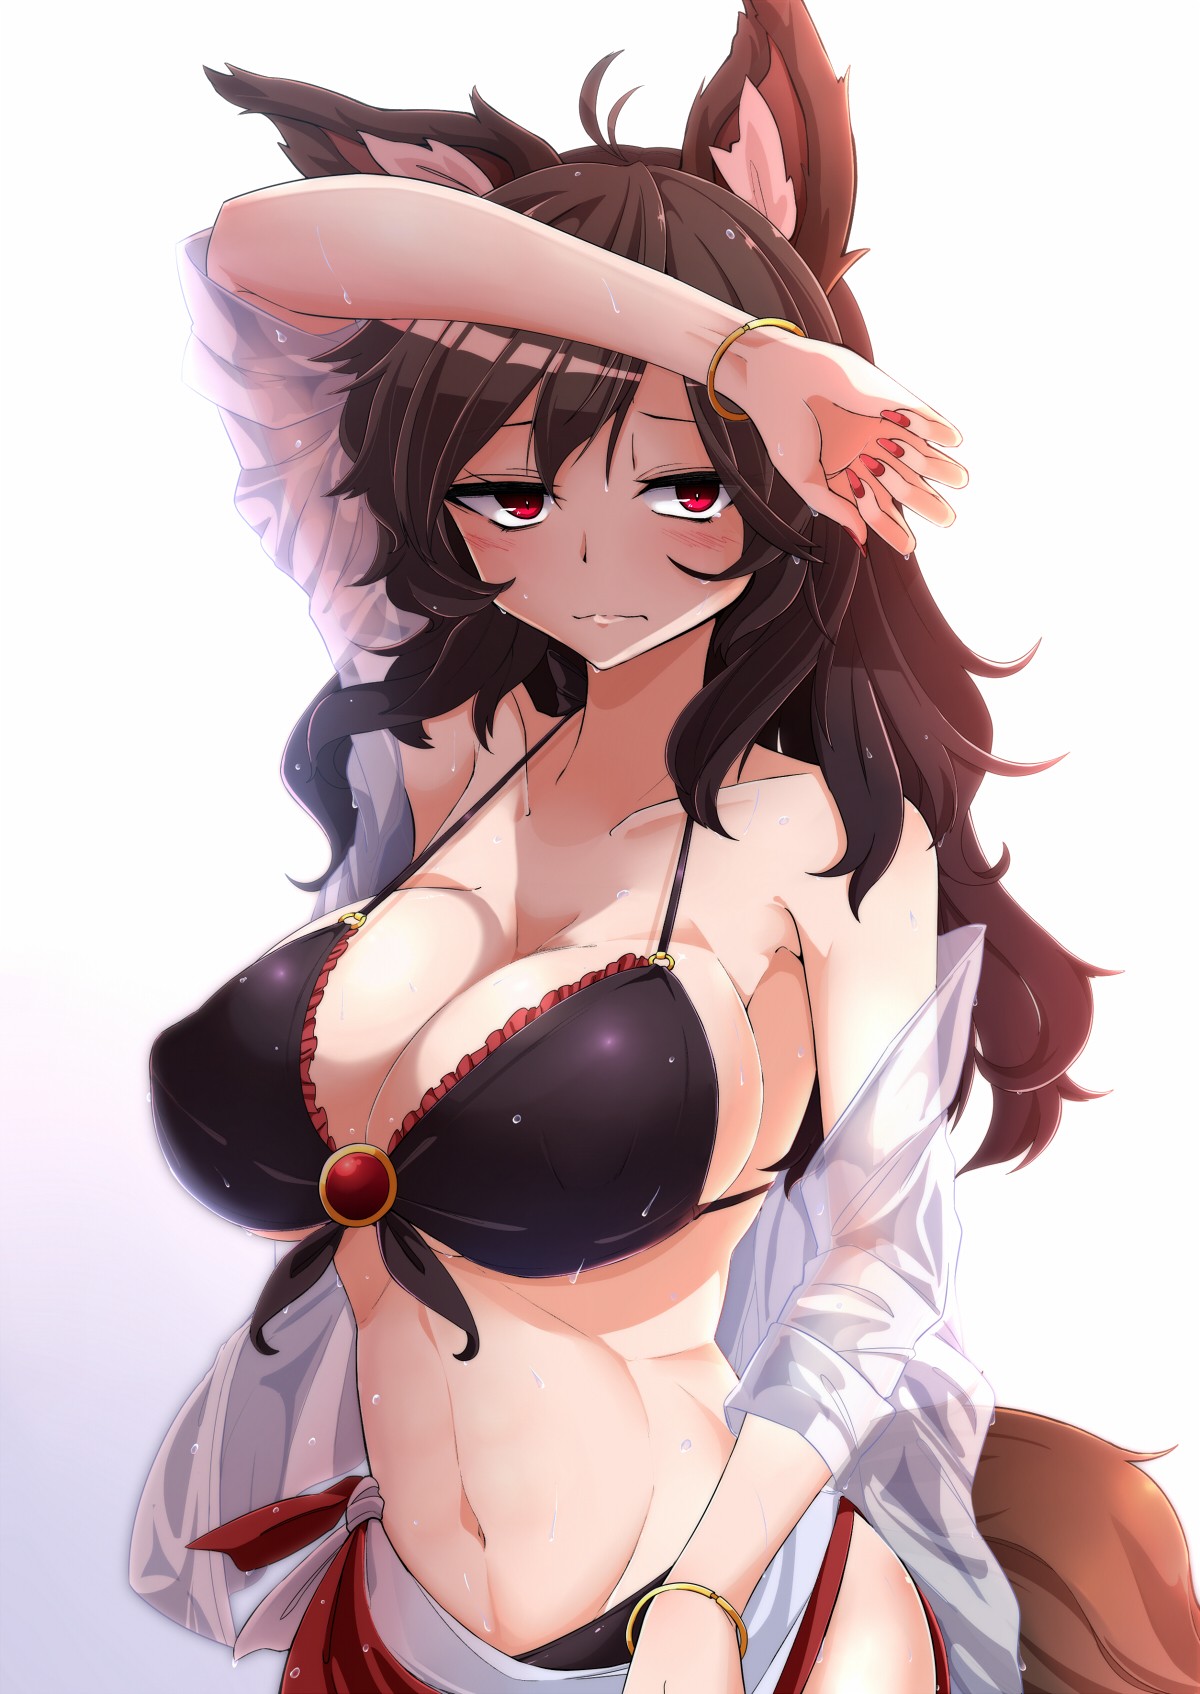 Anime 1200x1694 anime anime girls Imaizumi Kagerou Touhou animal ears bikini cleavage open shirt tail wet clothing long hair red eyes brunette long nails red nails big boobs wolf ears boobs huge breasts curvy belly